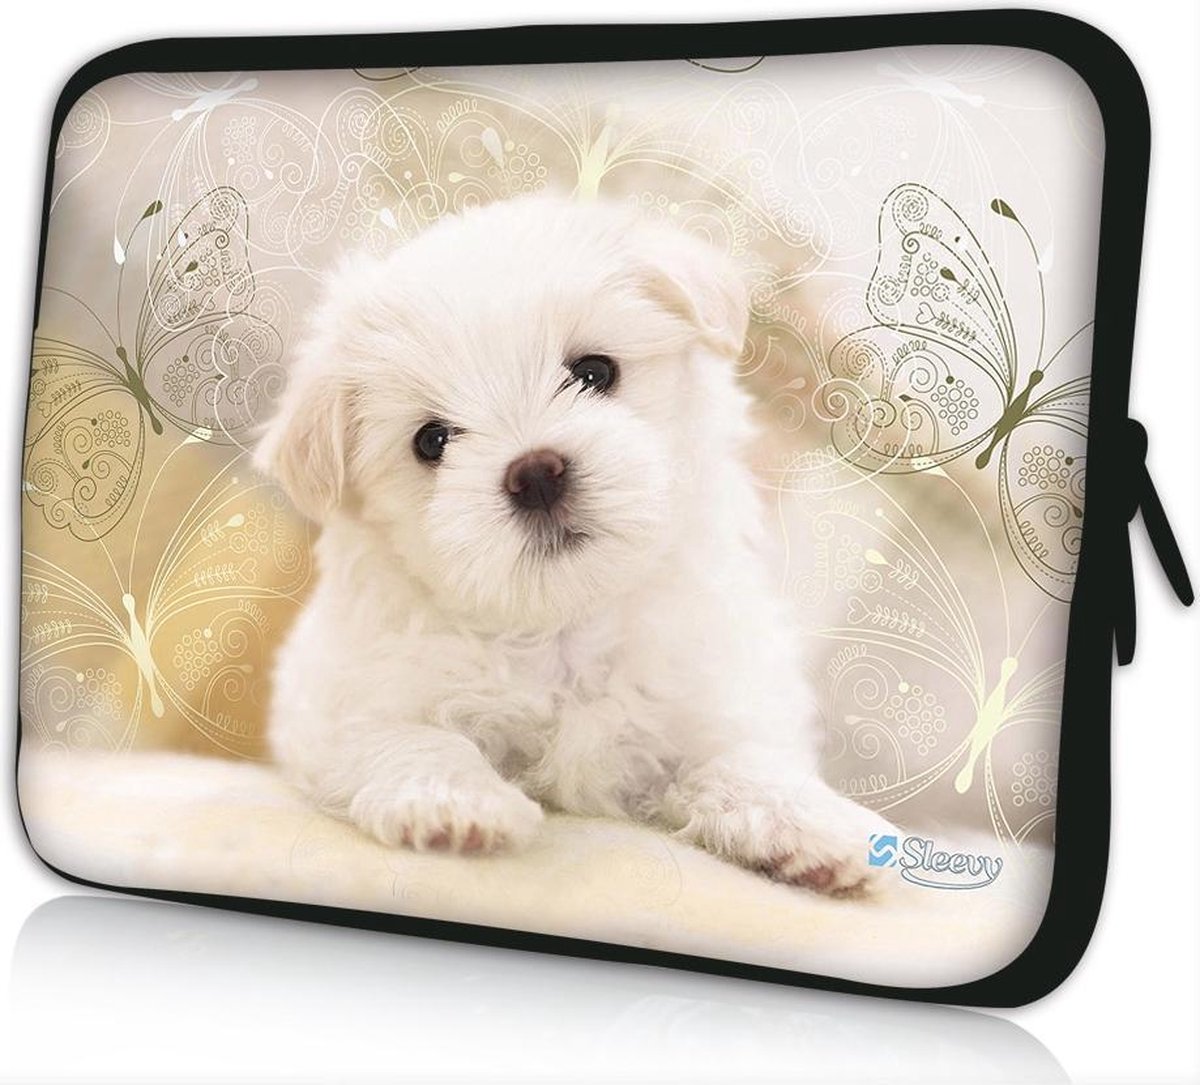 Sleevy 14 laptophoes witte puppy - laptop sleeve - laptopcover - Alle inch-maten & keuze uit 250+ designs! Sleevy